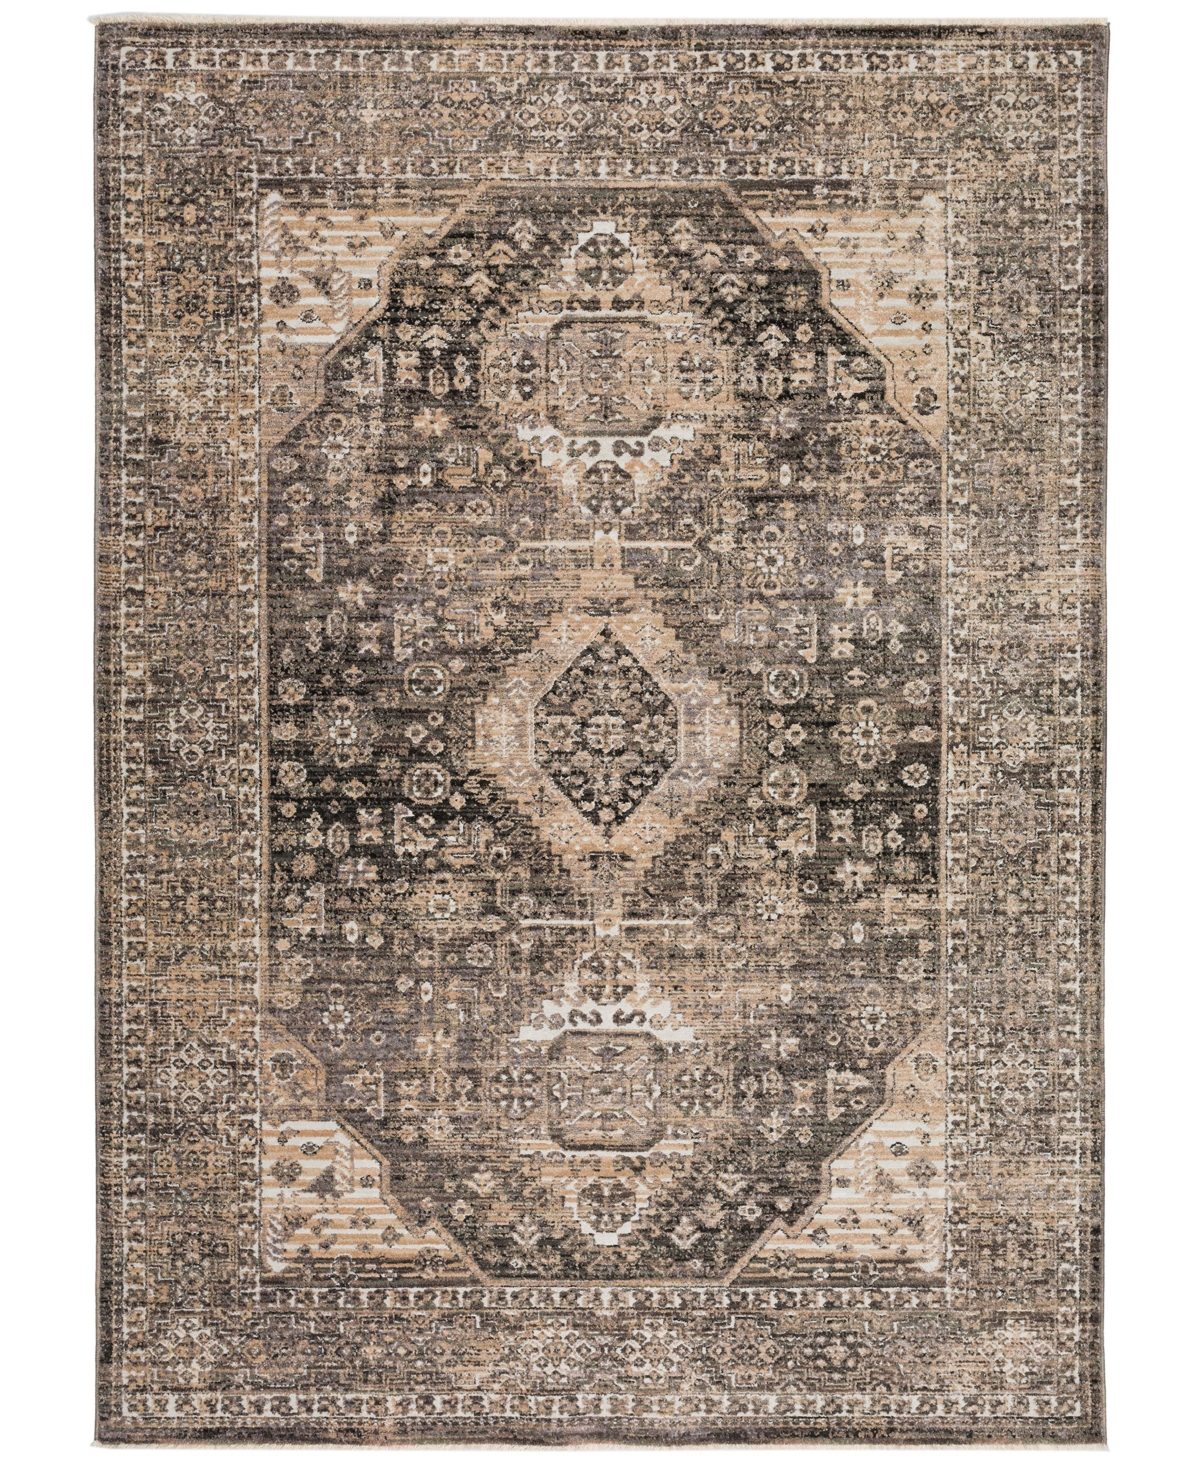 D Style Sergey Sgy2 7'10" X 10' Area Rug In Charcoal